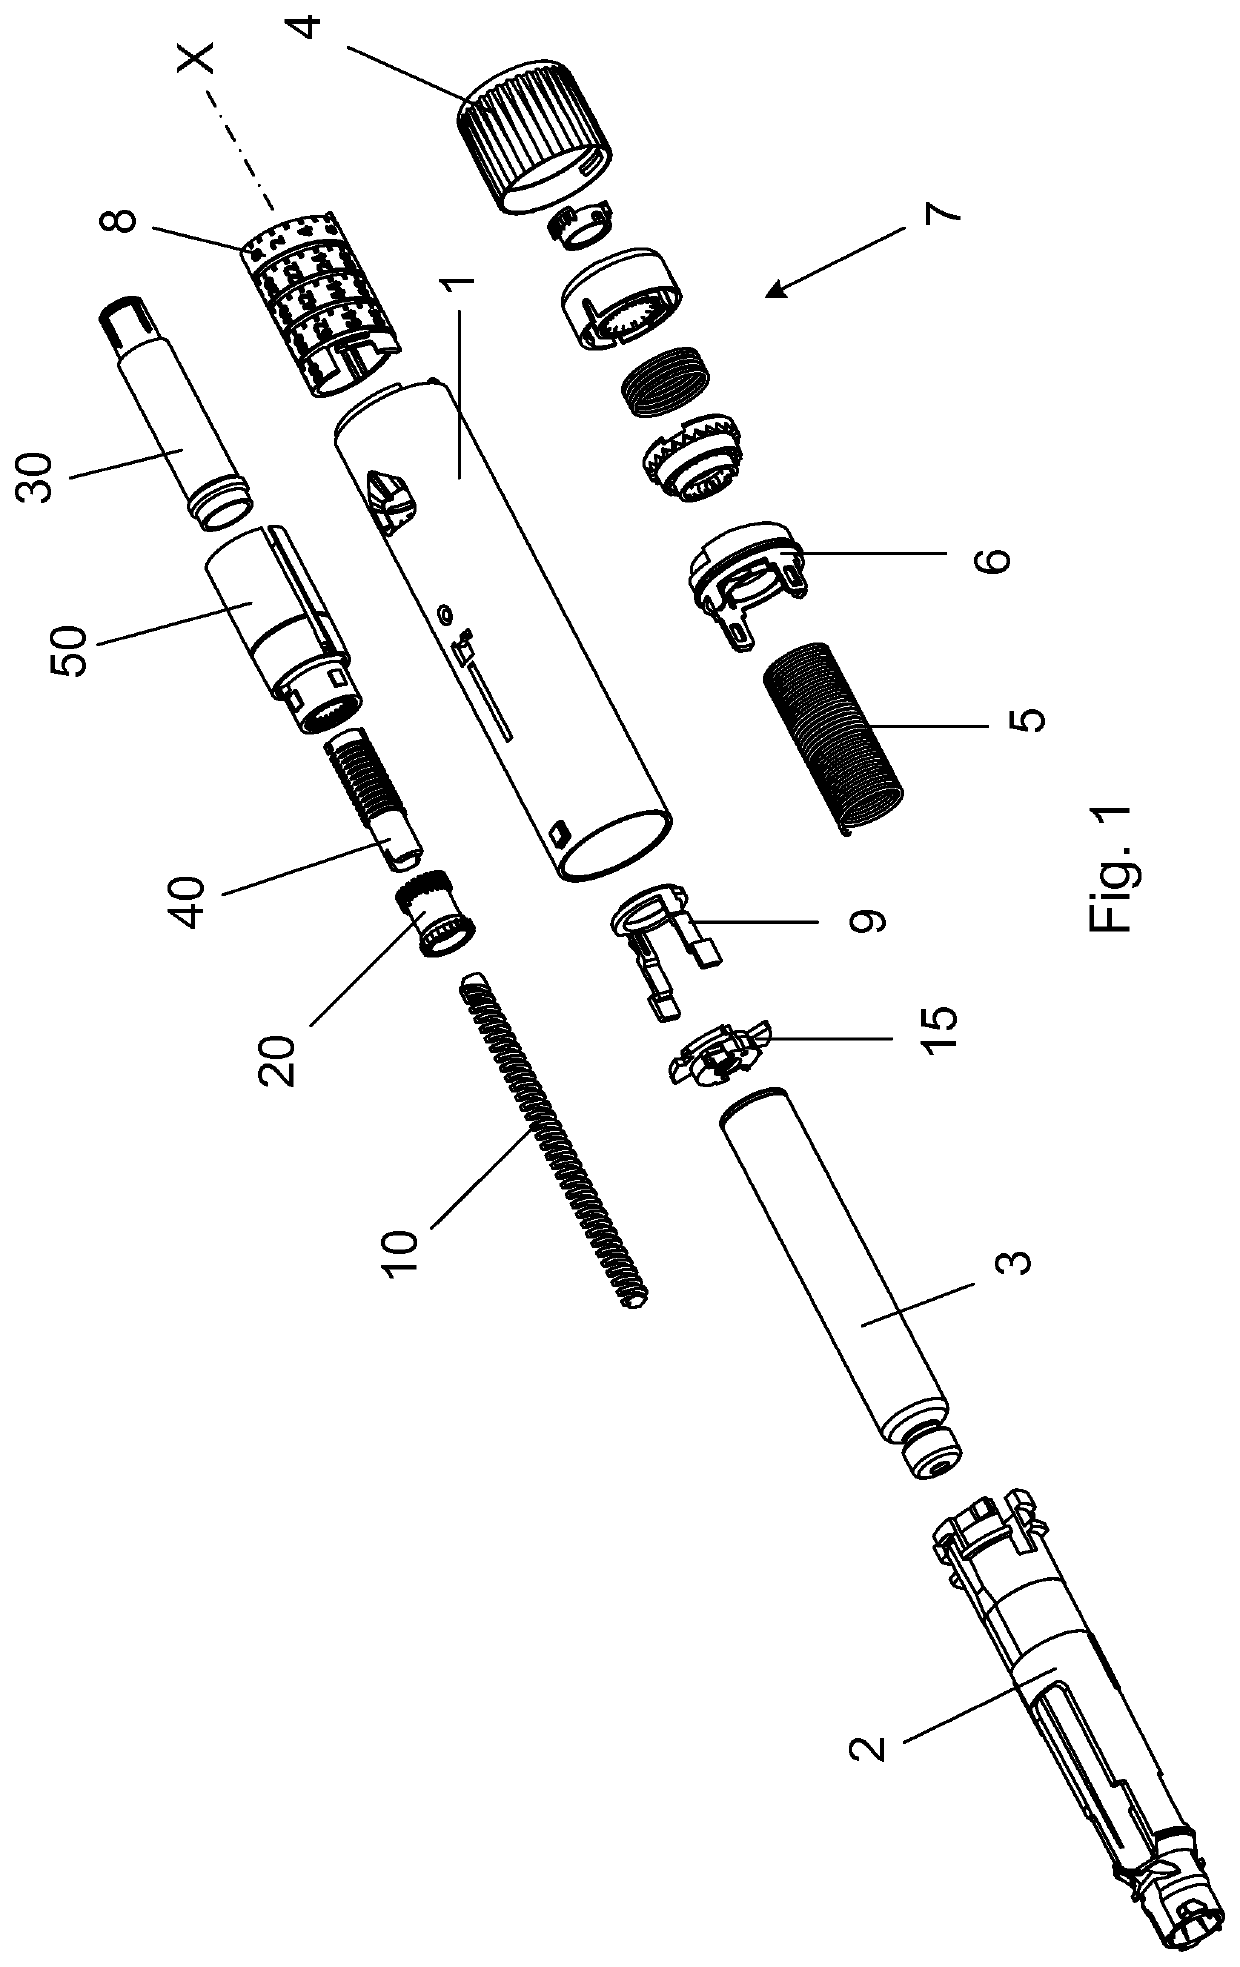 A prefilled injection device with cleaning chamber